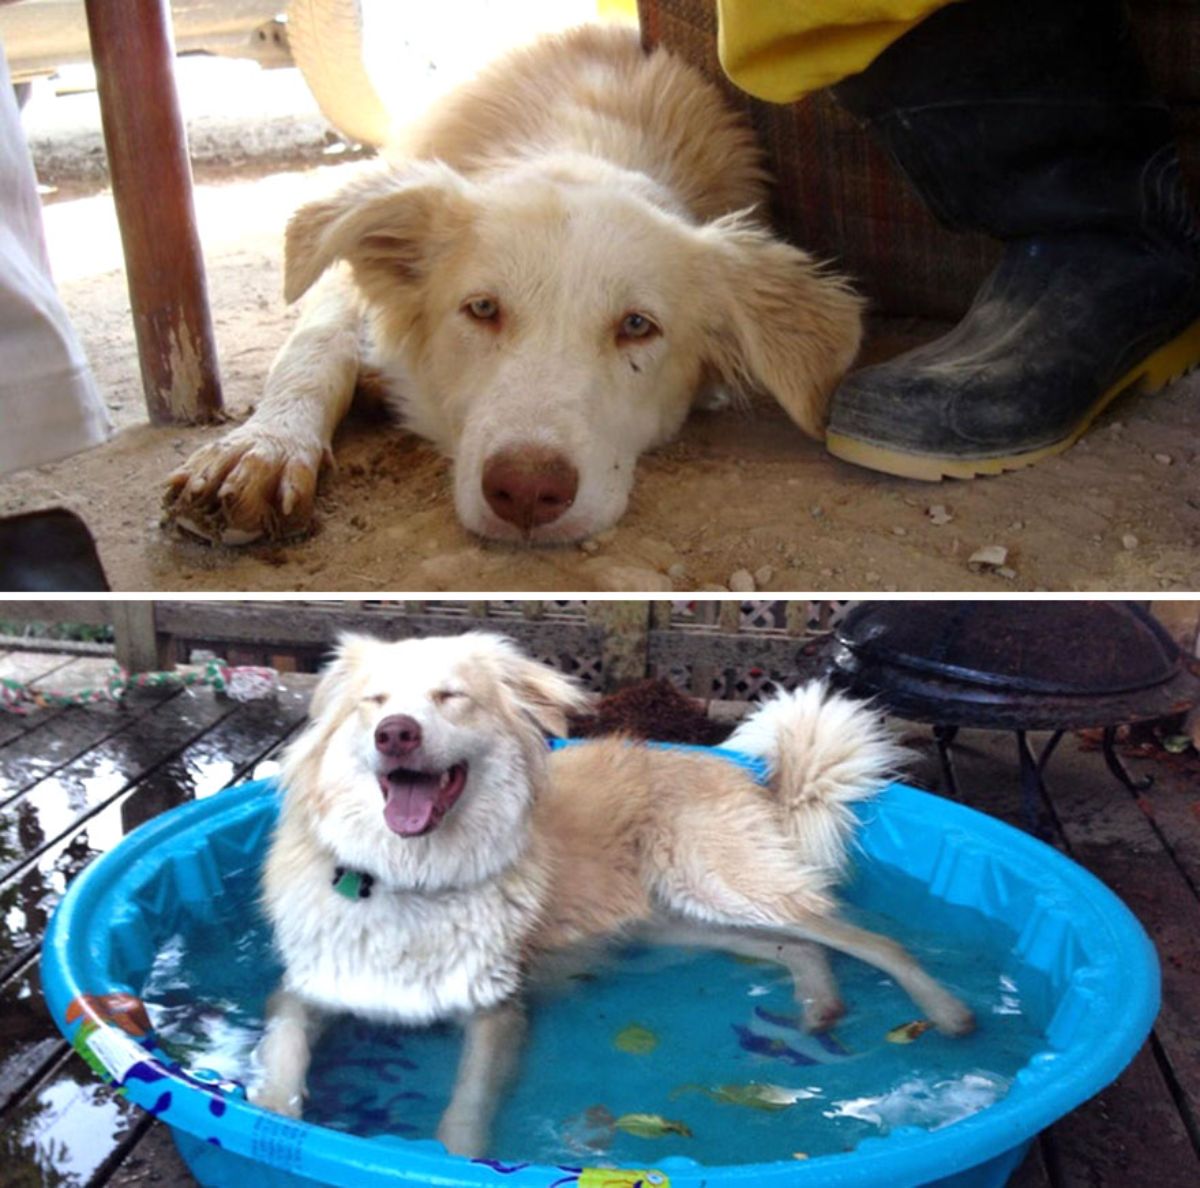 before photo of sad white dog under a vehicle and after photo of fluffy white dog in blue kiddie pool